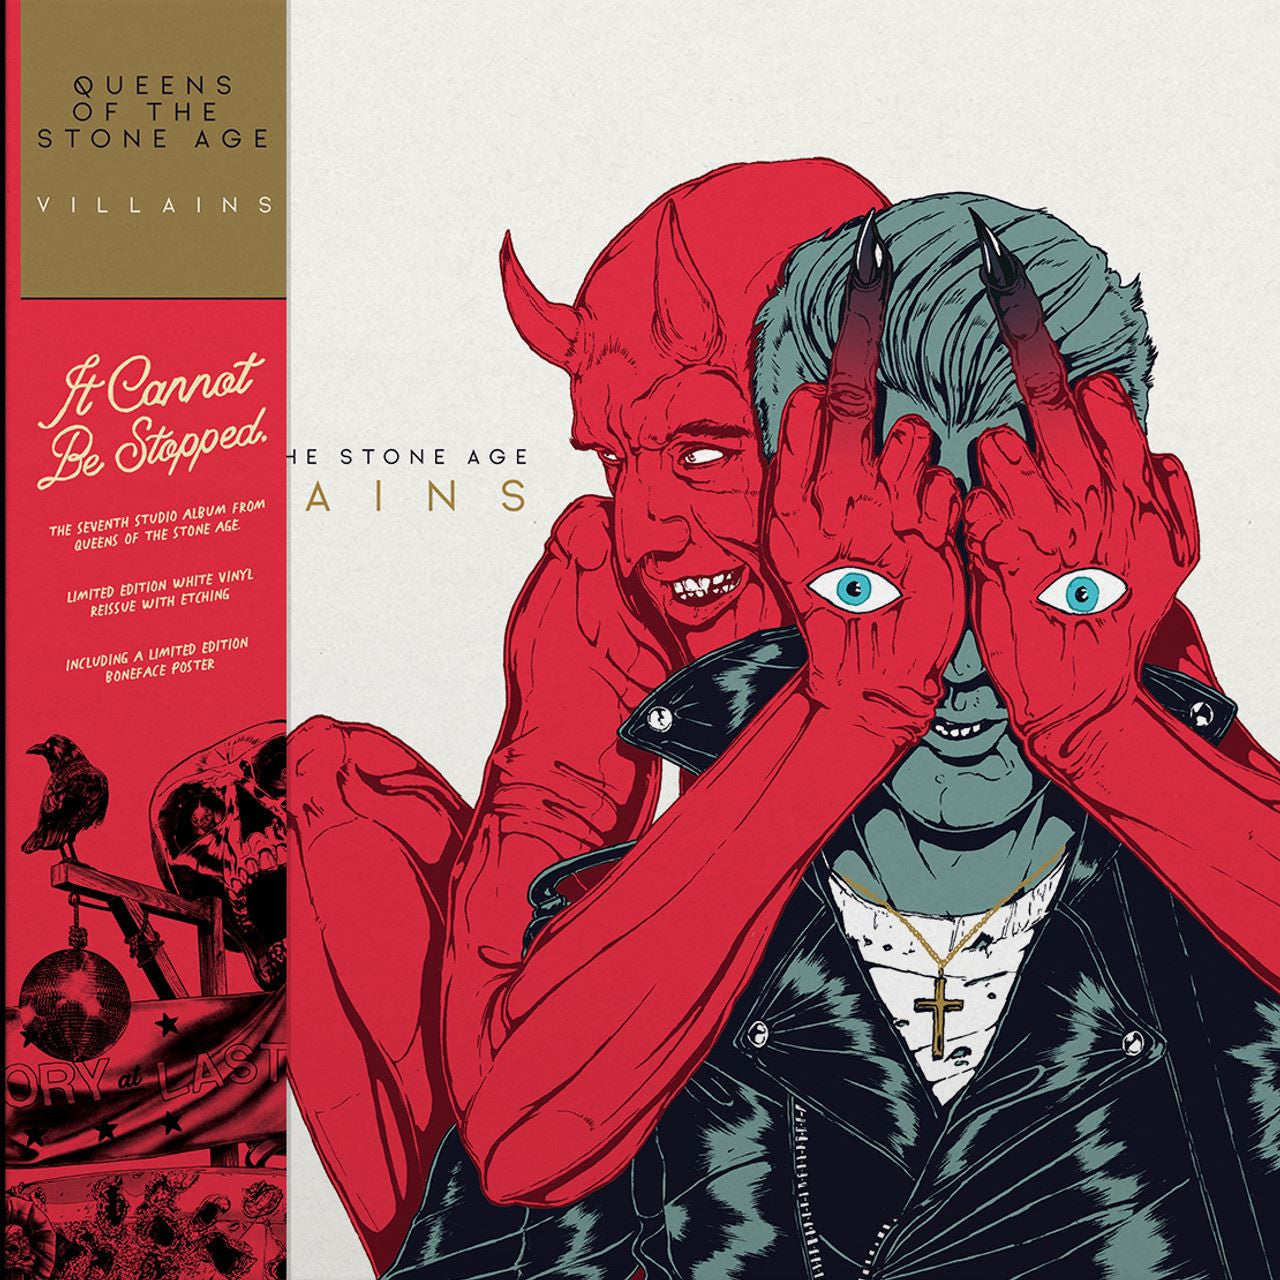 Queens of the Stone Age - Villains | Buy the Ltd Edition Vinyl from Flying Nun